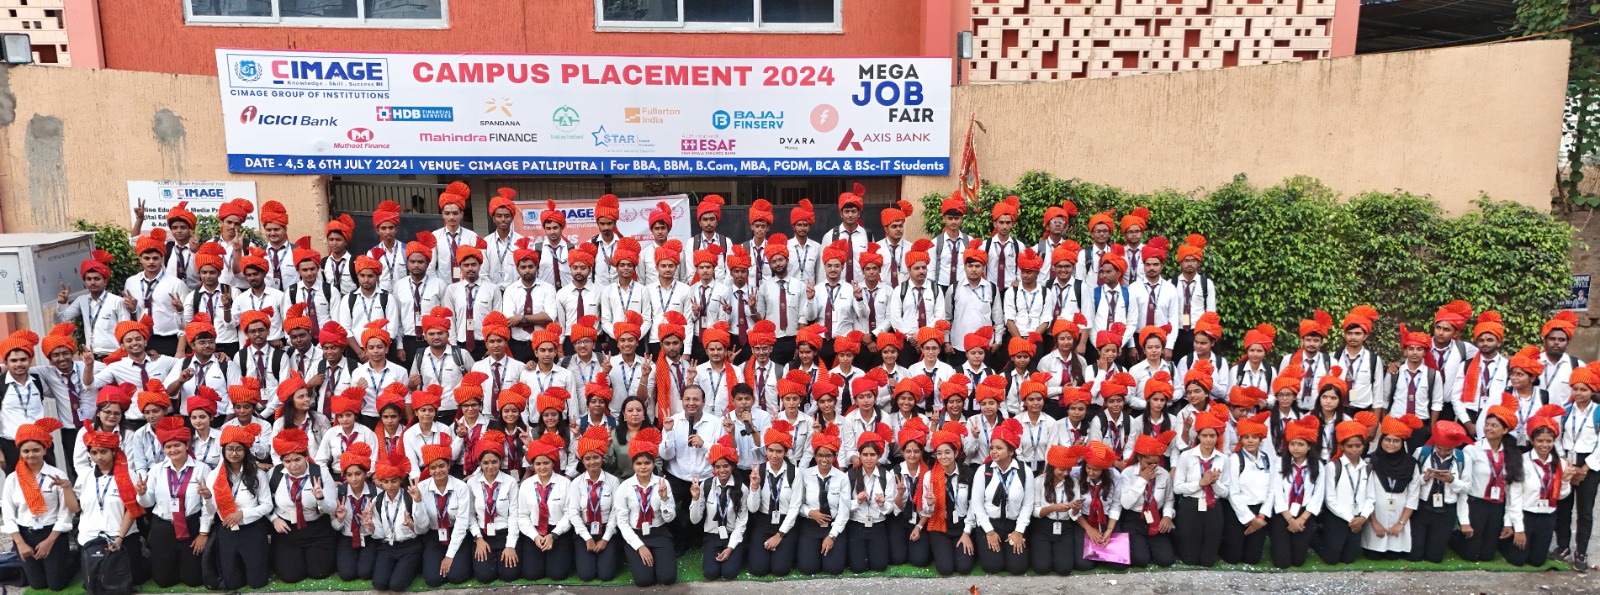 263 Students of CIMAGE College got Campus Placement in ICICI Bank, TCS, Accenture, Axis Bank etc